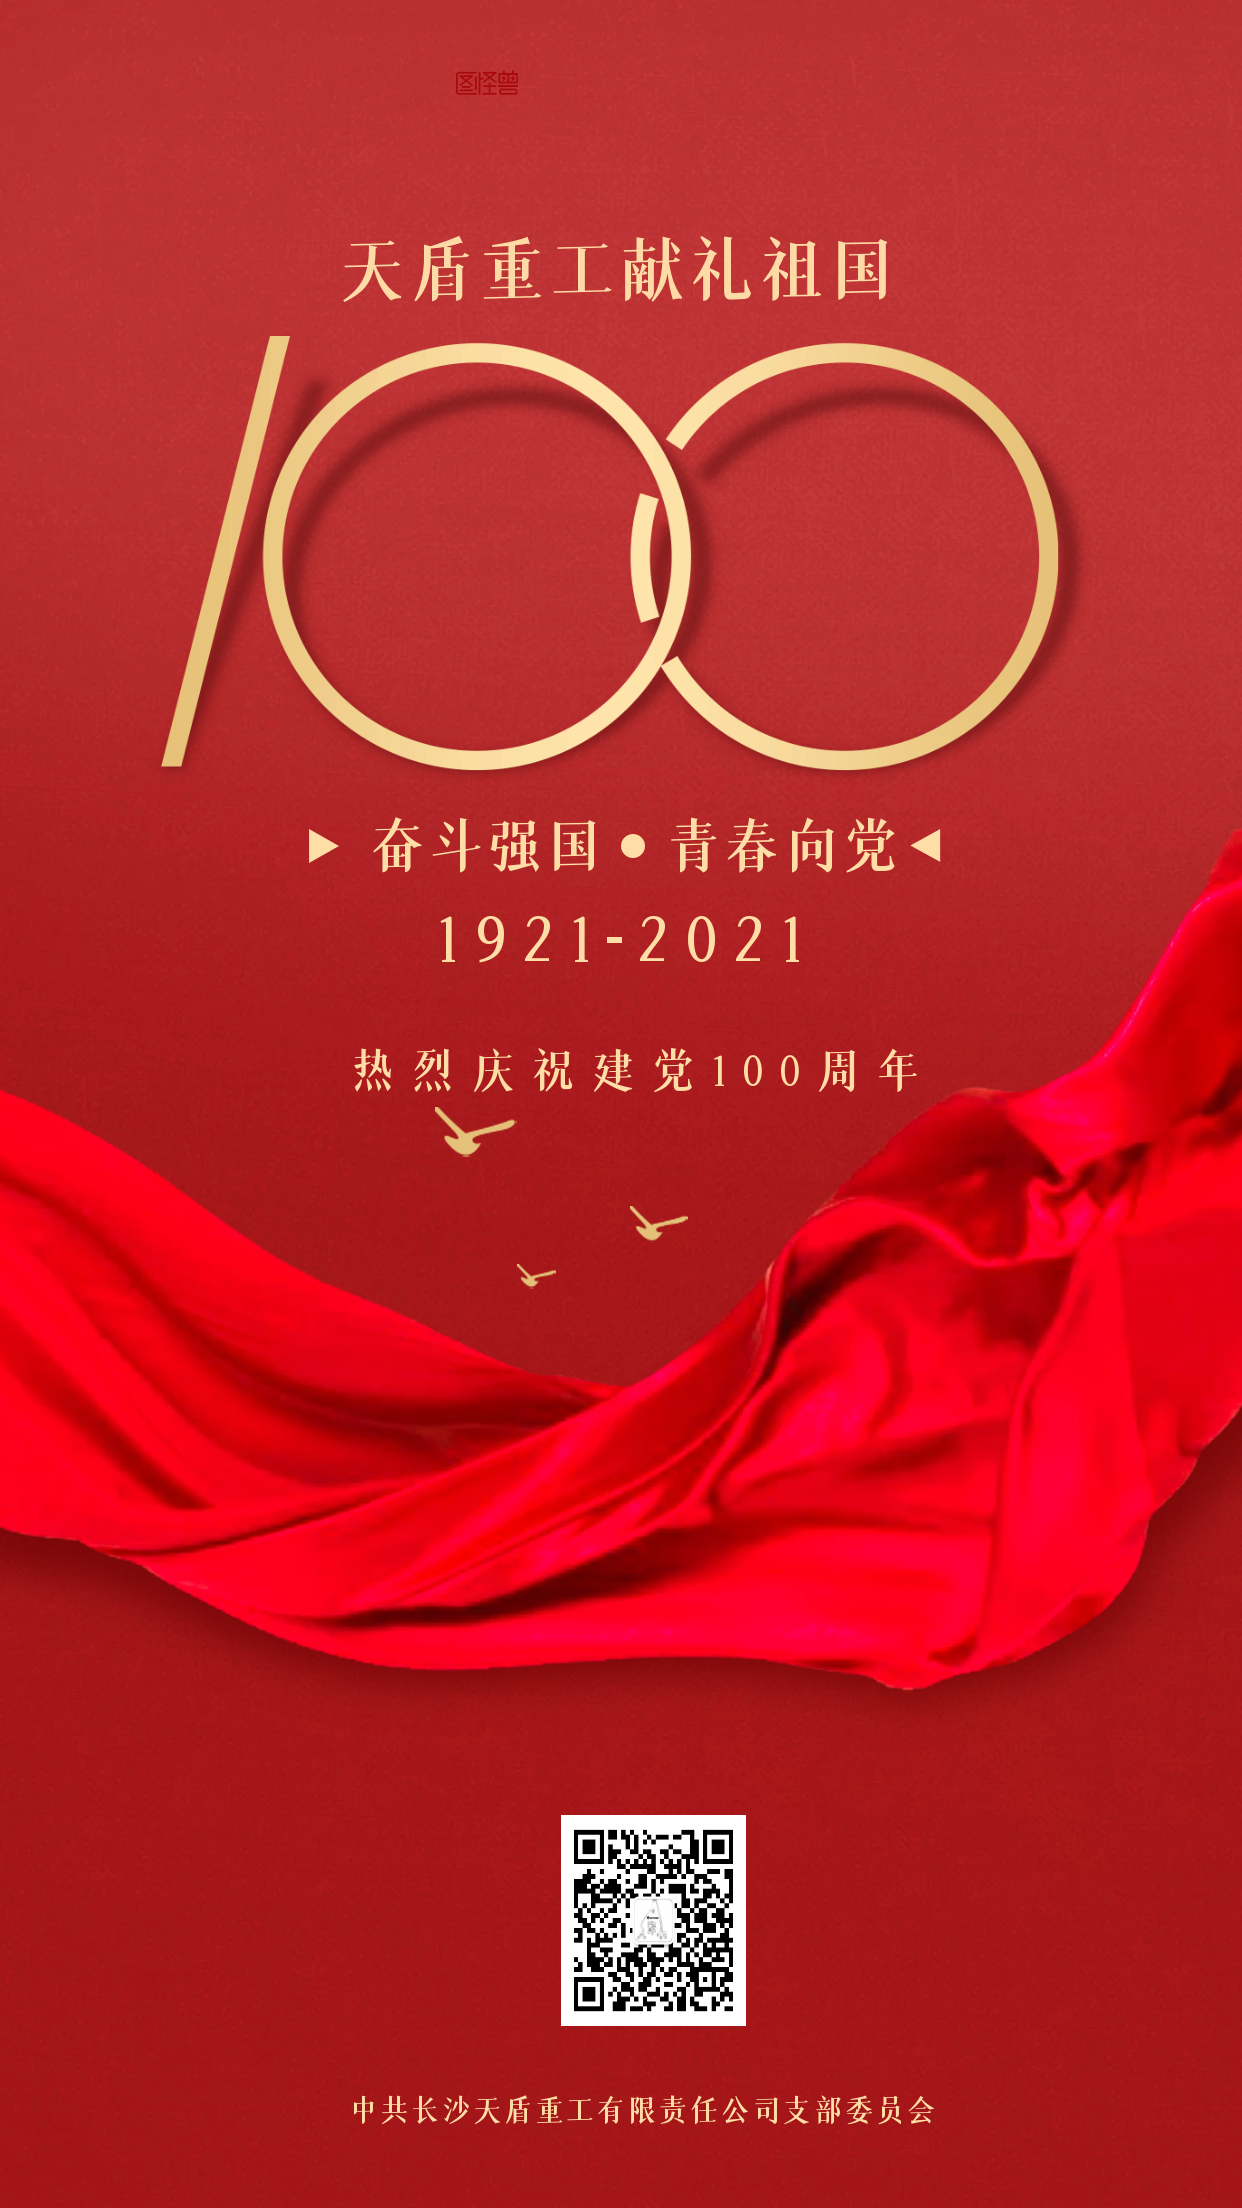 Celebrate the 100th anniversary of the founding of the Communist Party of China